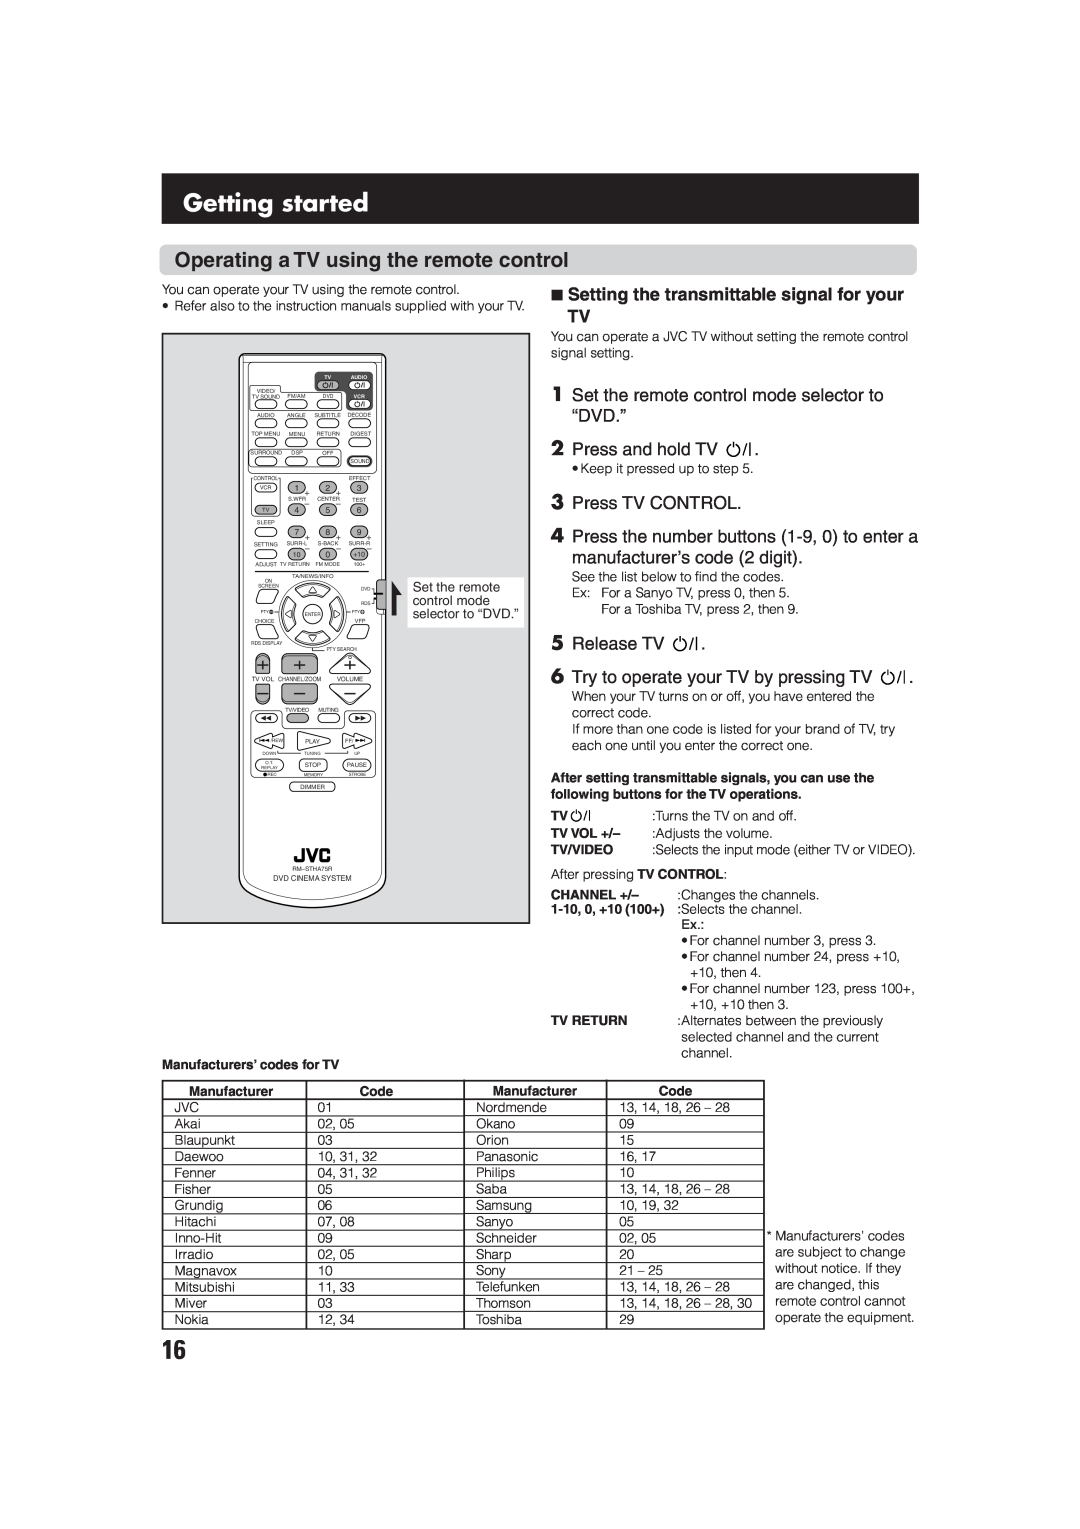 JVC TH-A75R Operating a TV using the remote control, 7Setting the transmittable signal for your TV, 2Press and hold TV 